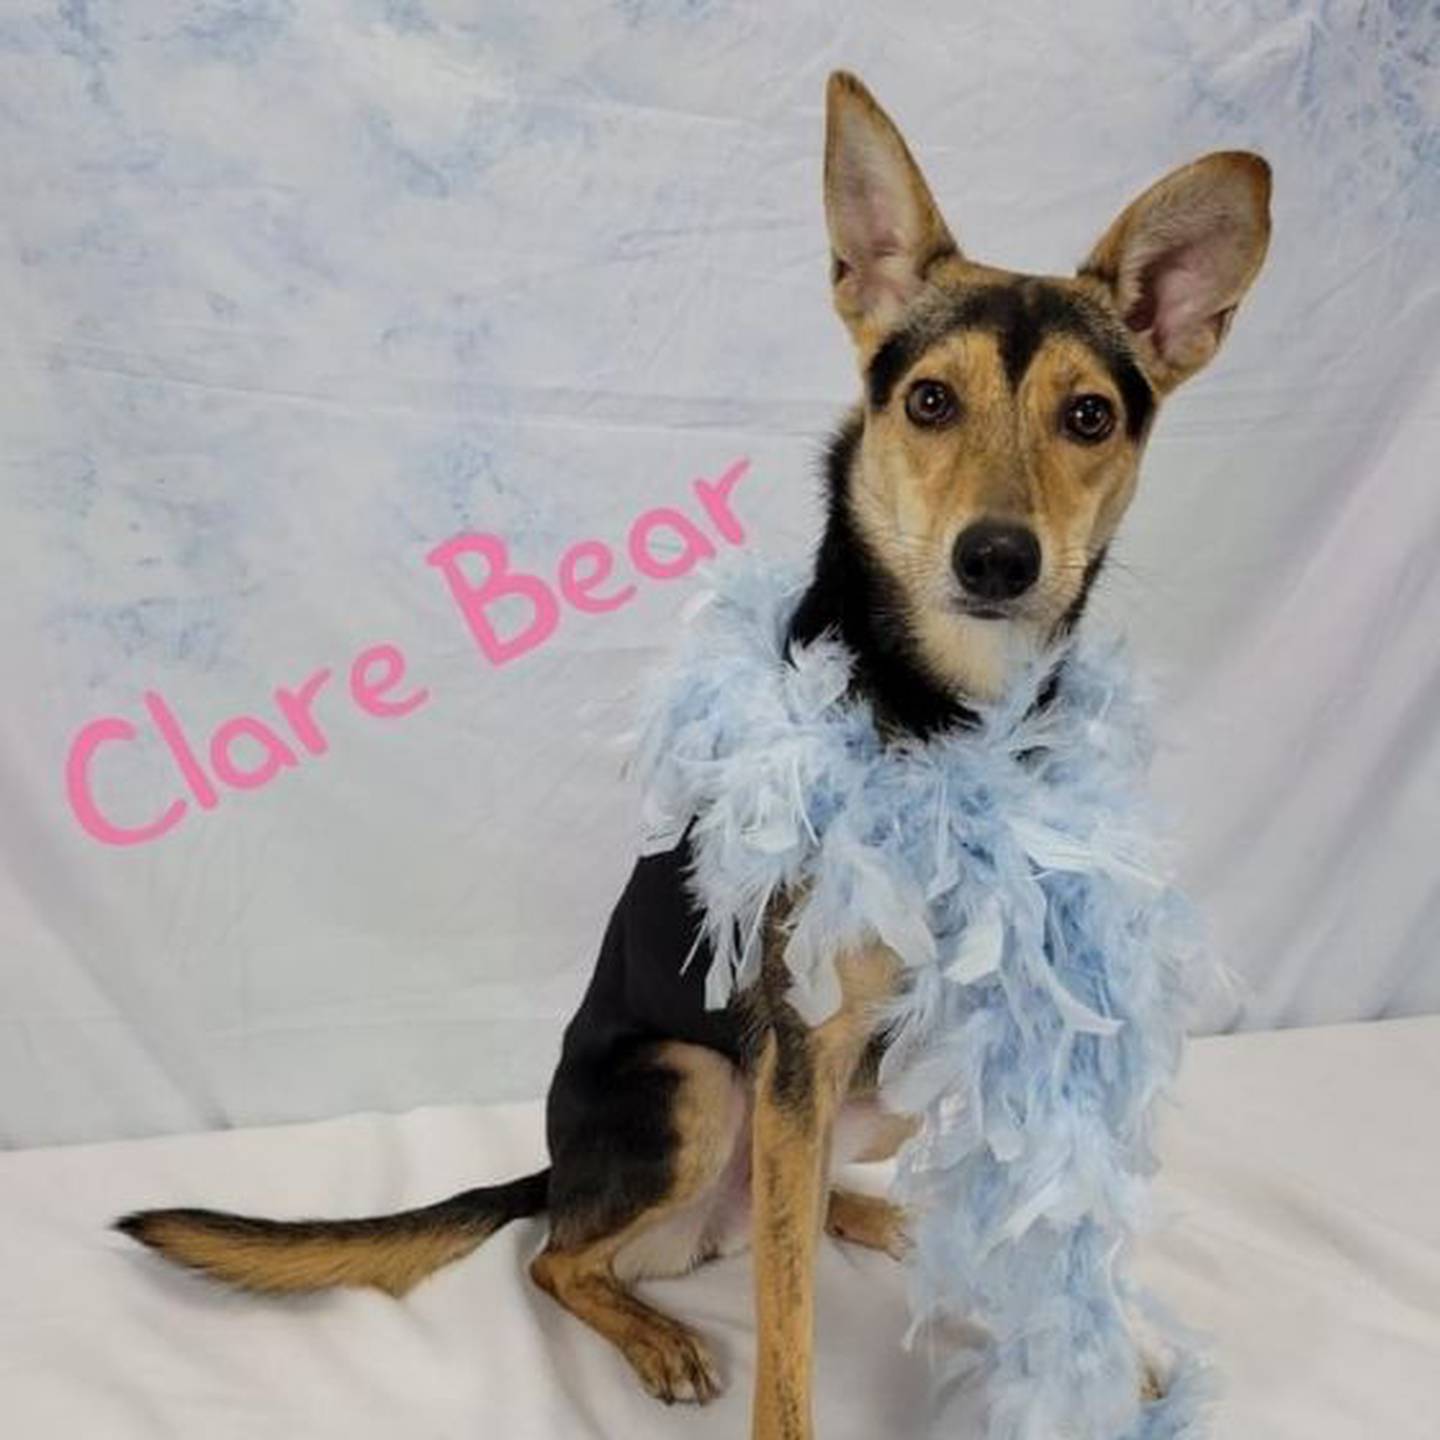 Seven-month-old Clare Bear is smart and super affectionate. To meet Clare Bear, contact Hopeful Tails Animal Rescue at hopefultailsadoptions@outlook.com. Visit hopefultailsanimalrescue.org.